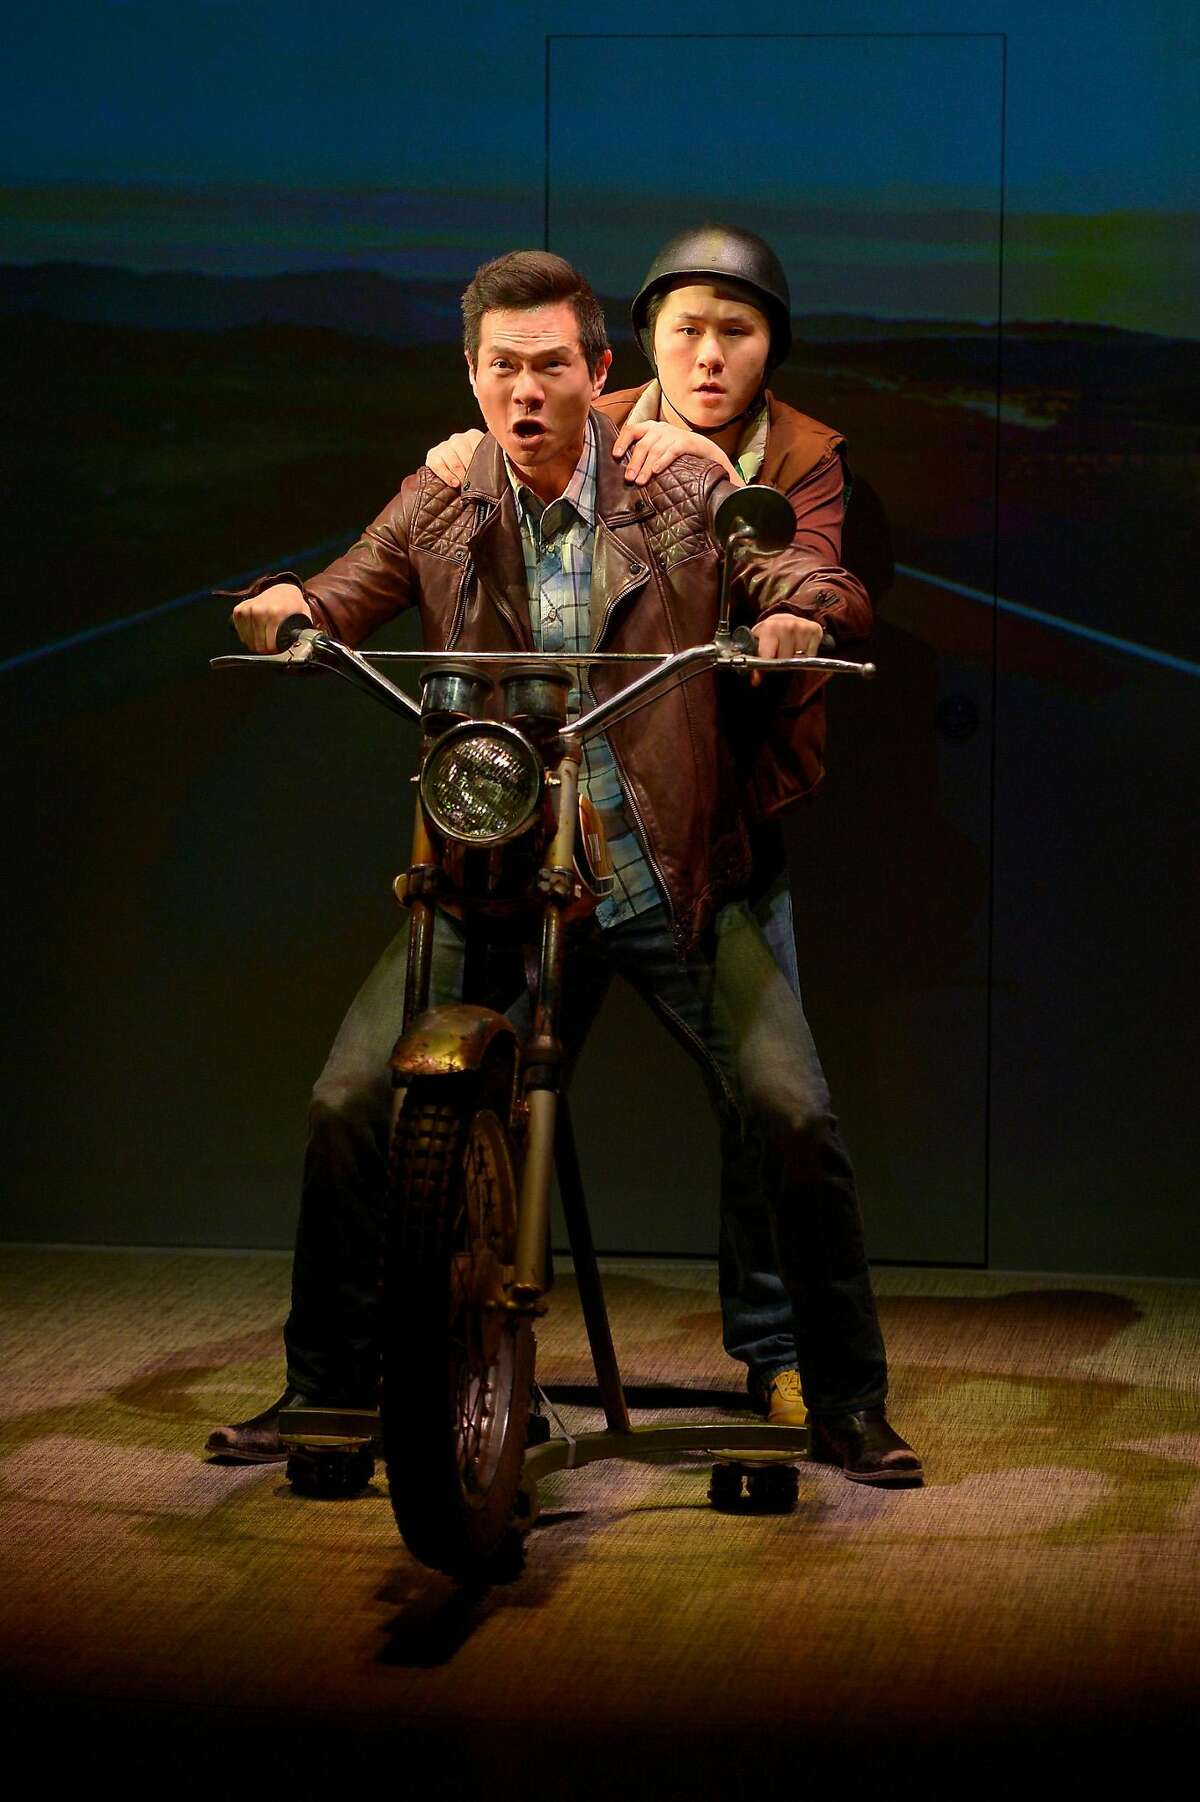 Quang (James Seol, front) and friend Nhan (Stephen Hu, back) in American Conservatory Theater's "Vietgone."